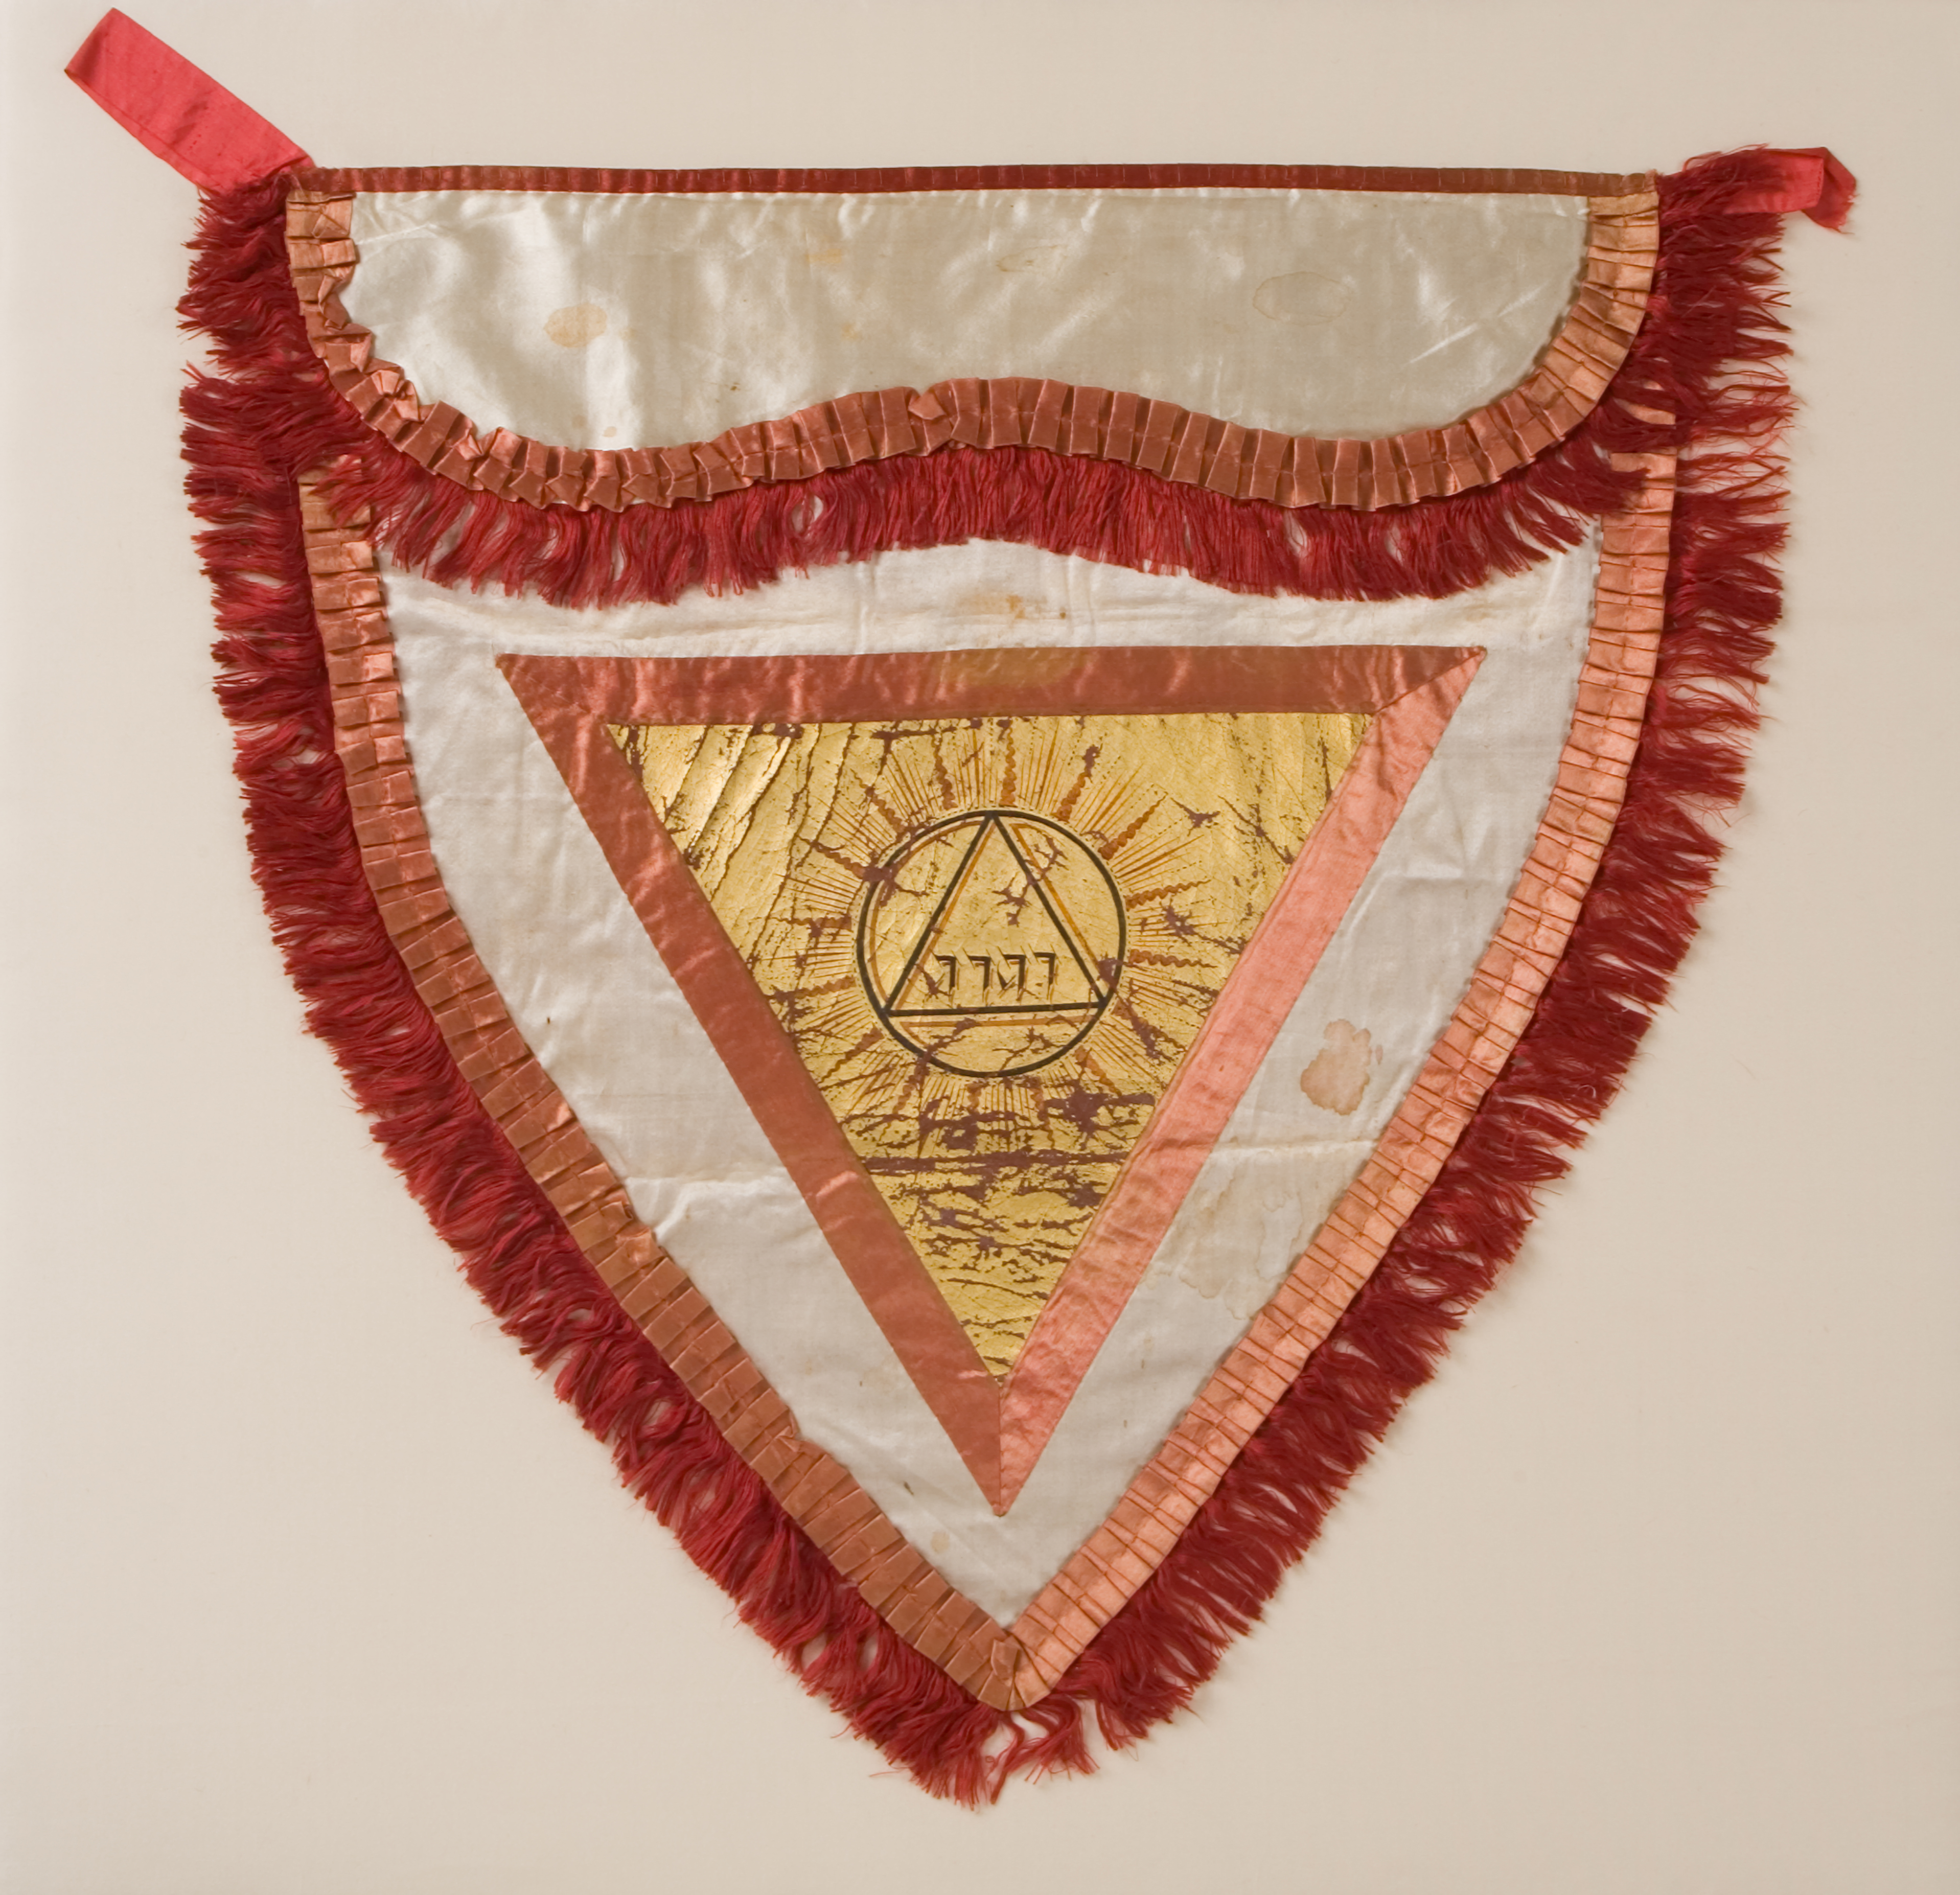 Scottish Rite Lodge of Perfection Masonic apron owned by Richard Clough Anderson, ca. 1815-1825